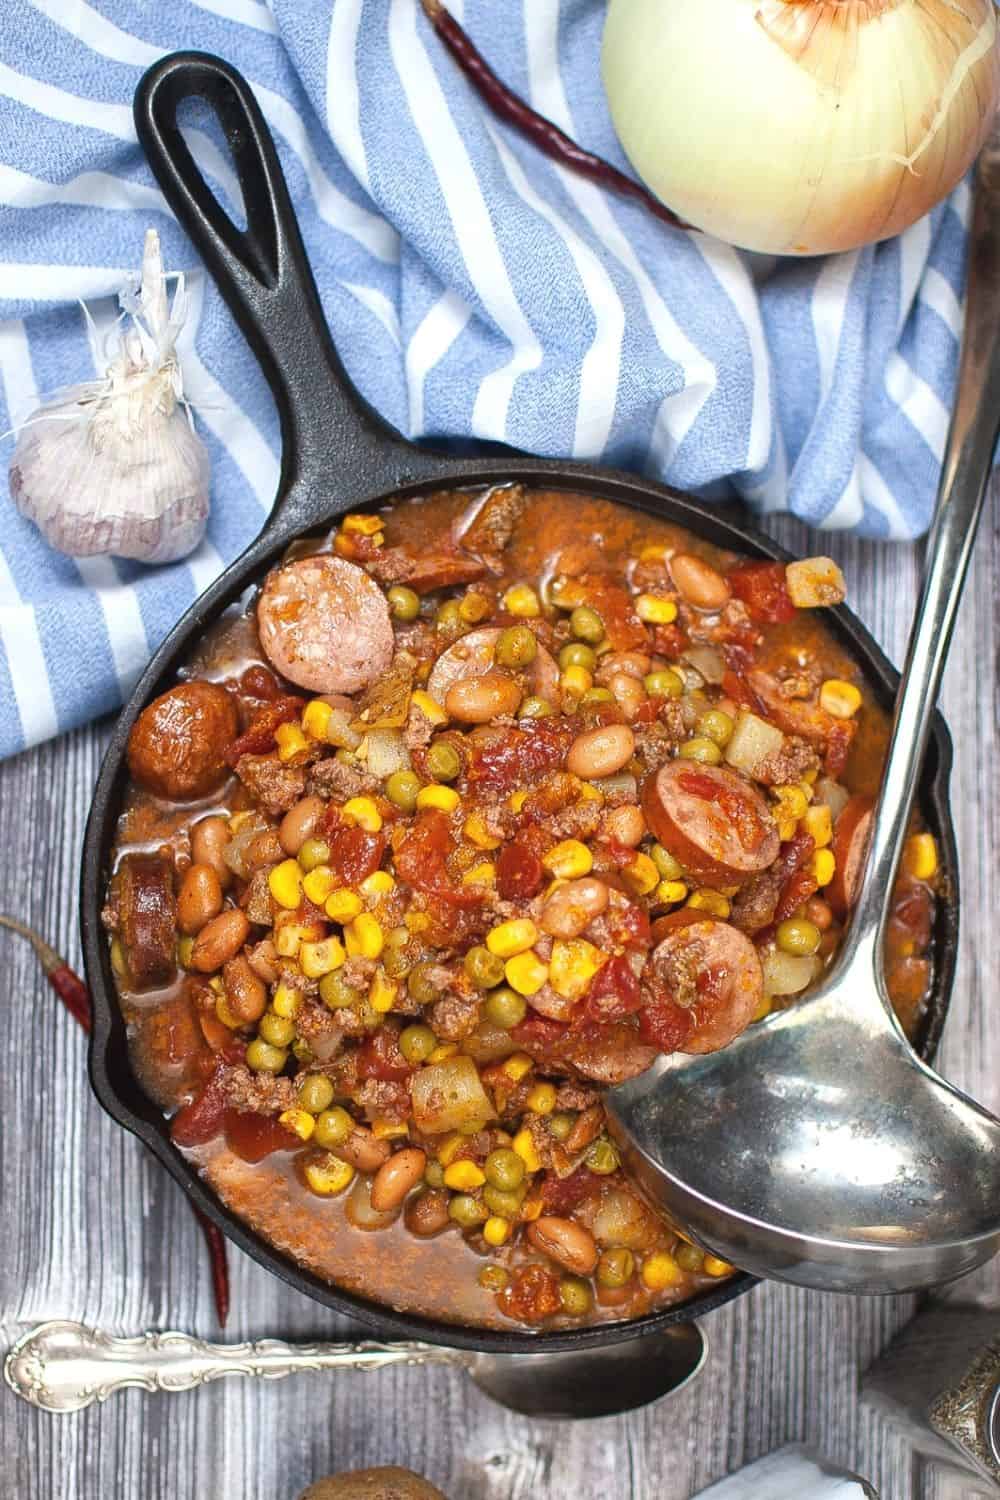 cooked cowboy stew in a cast iron skillet, next to a blue and white napkin, ready to be served.